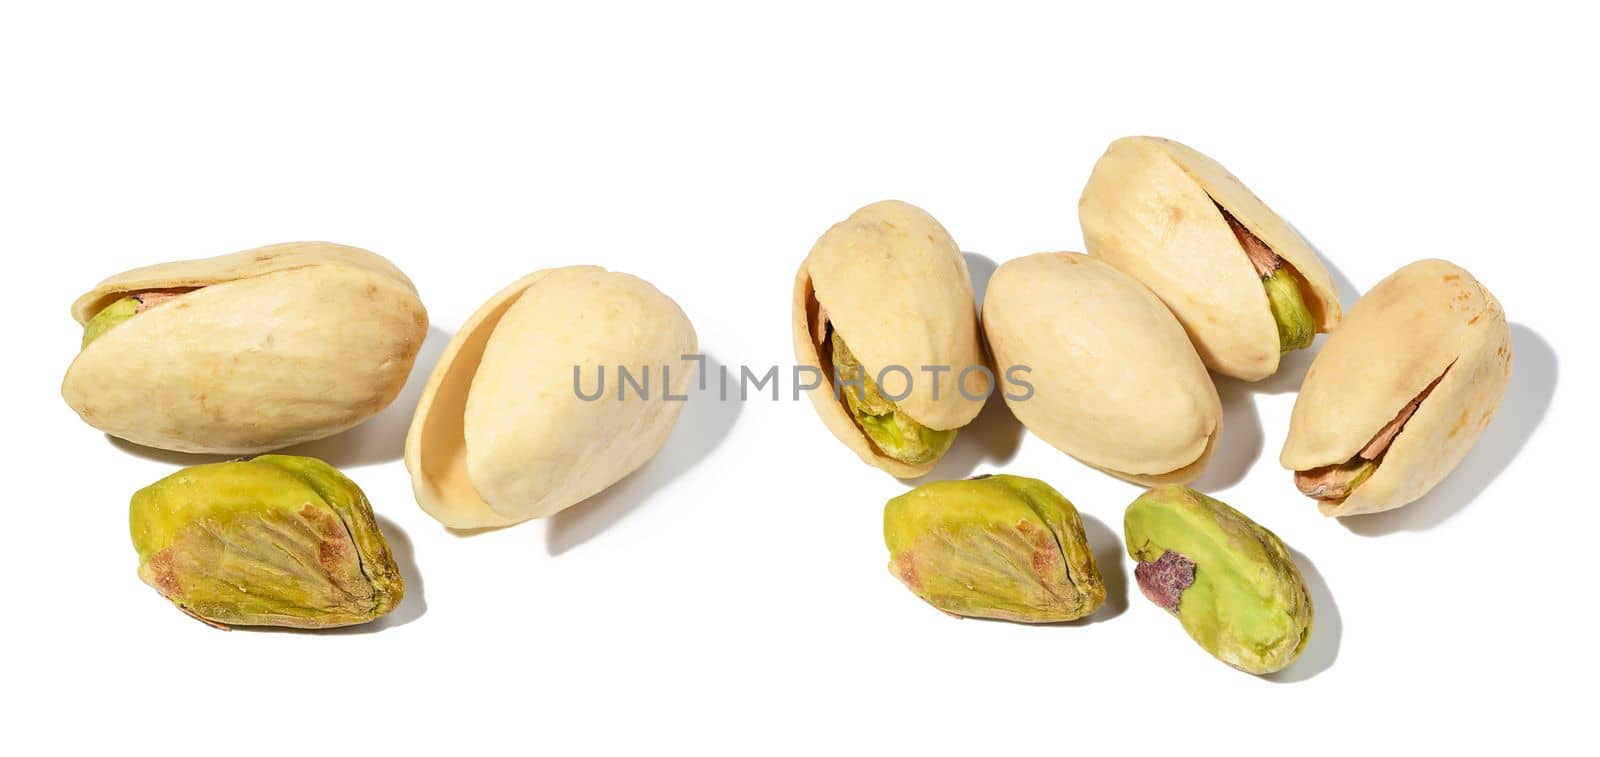 Salted open inshell pistachios isolated on a white background, tasty and healthy snack, close up. Set